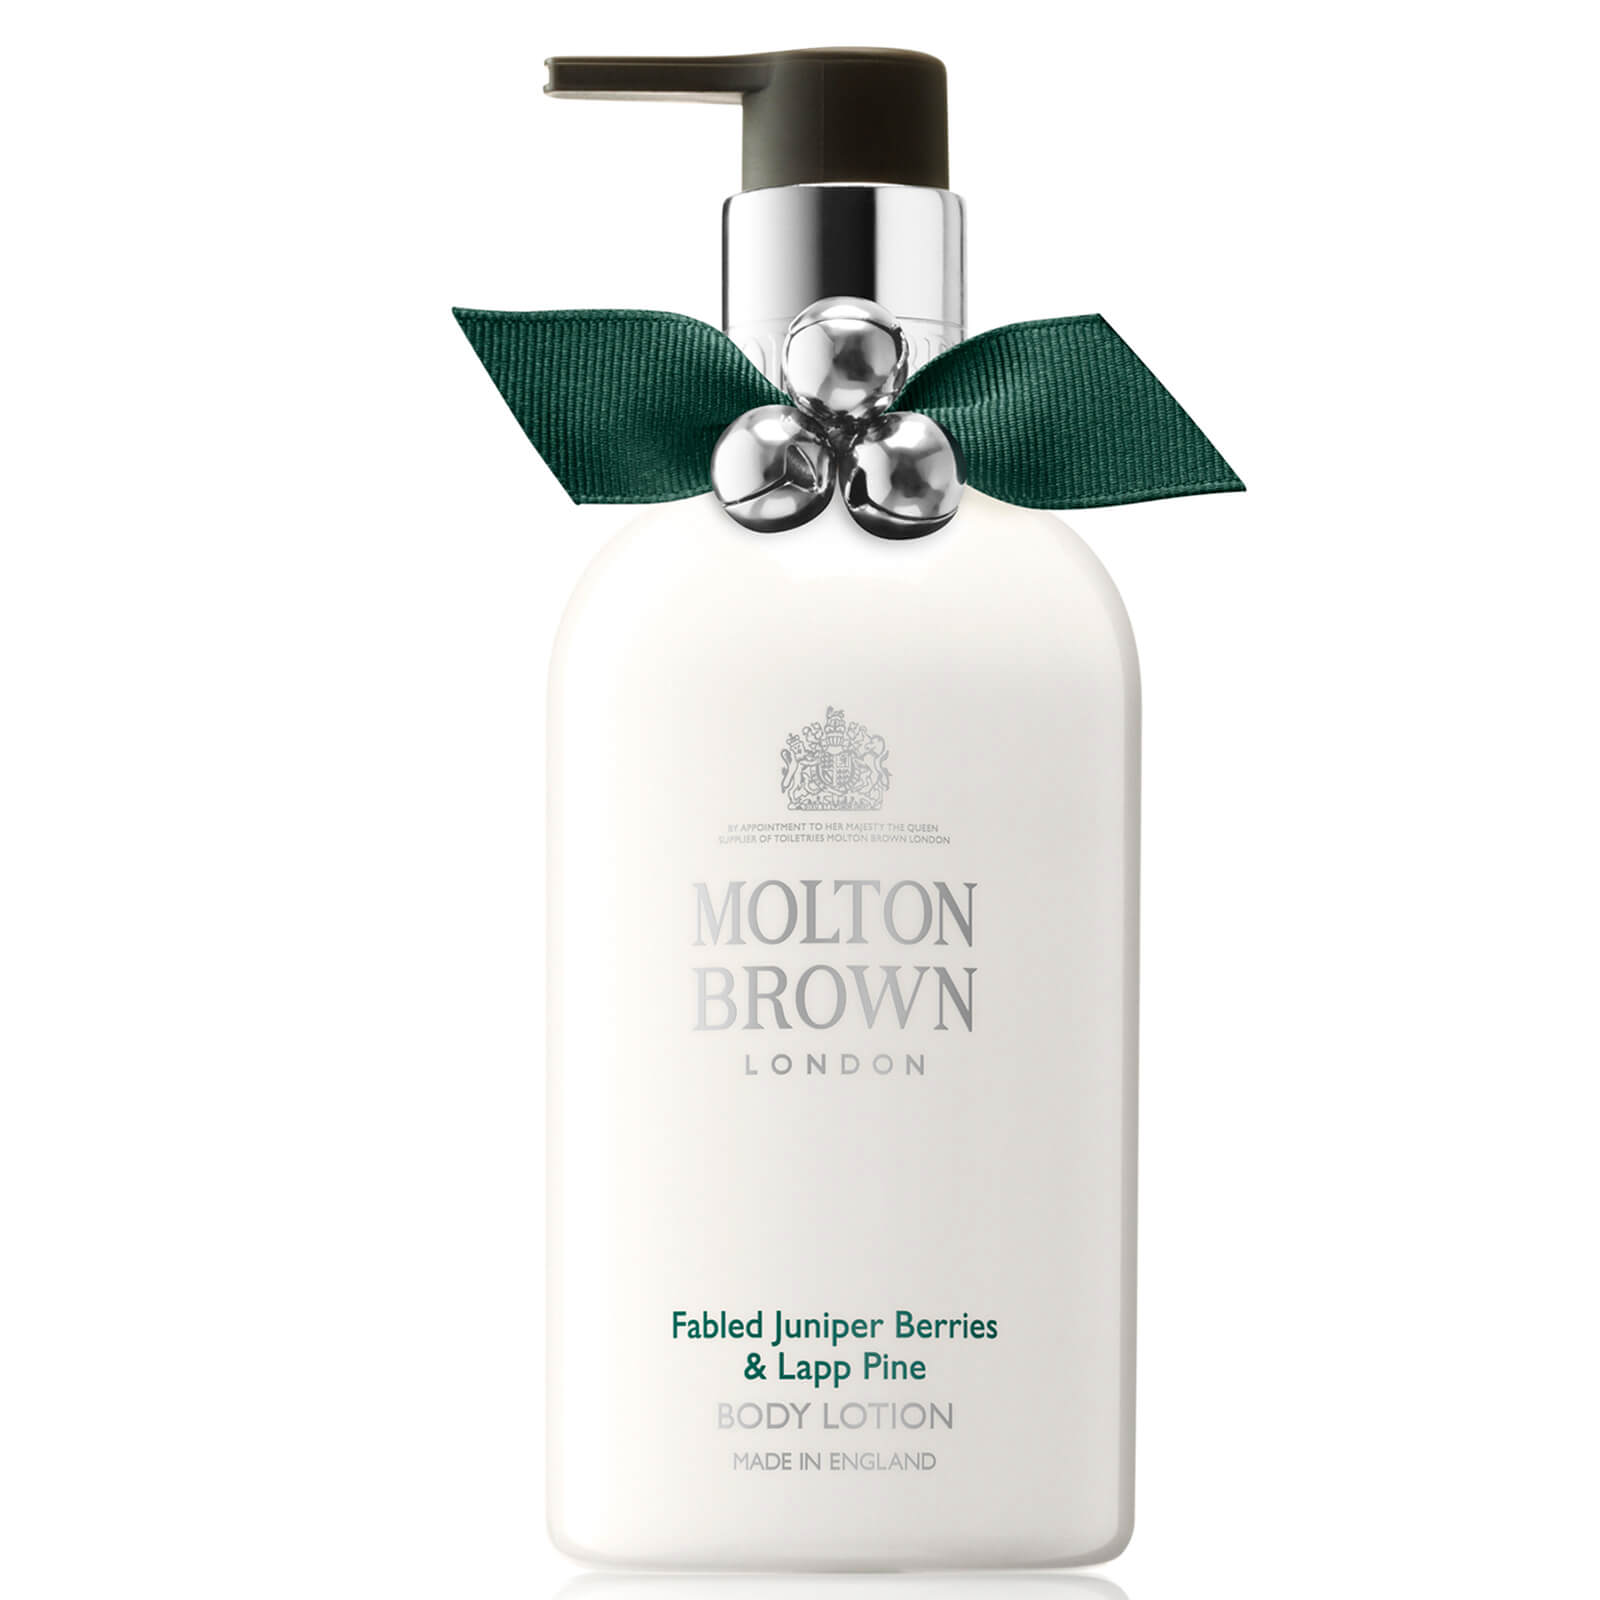 Molton Brown Fabled Juniper Berries and Lapp Pine Body Lotion 300ml